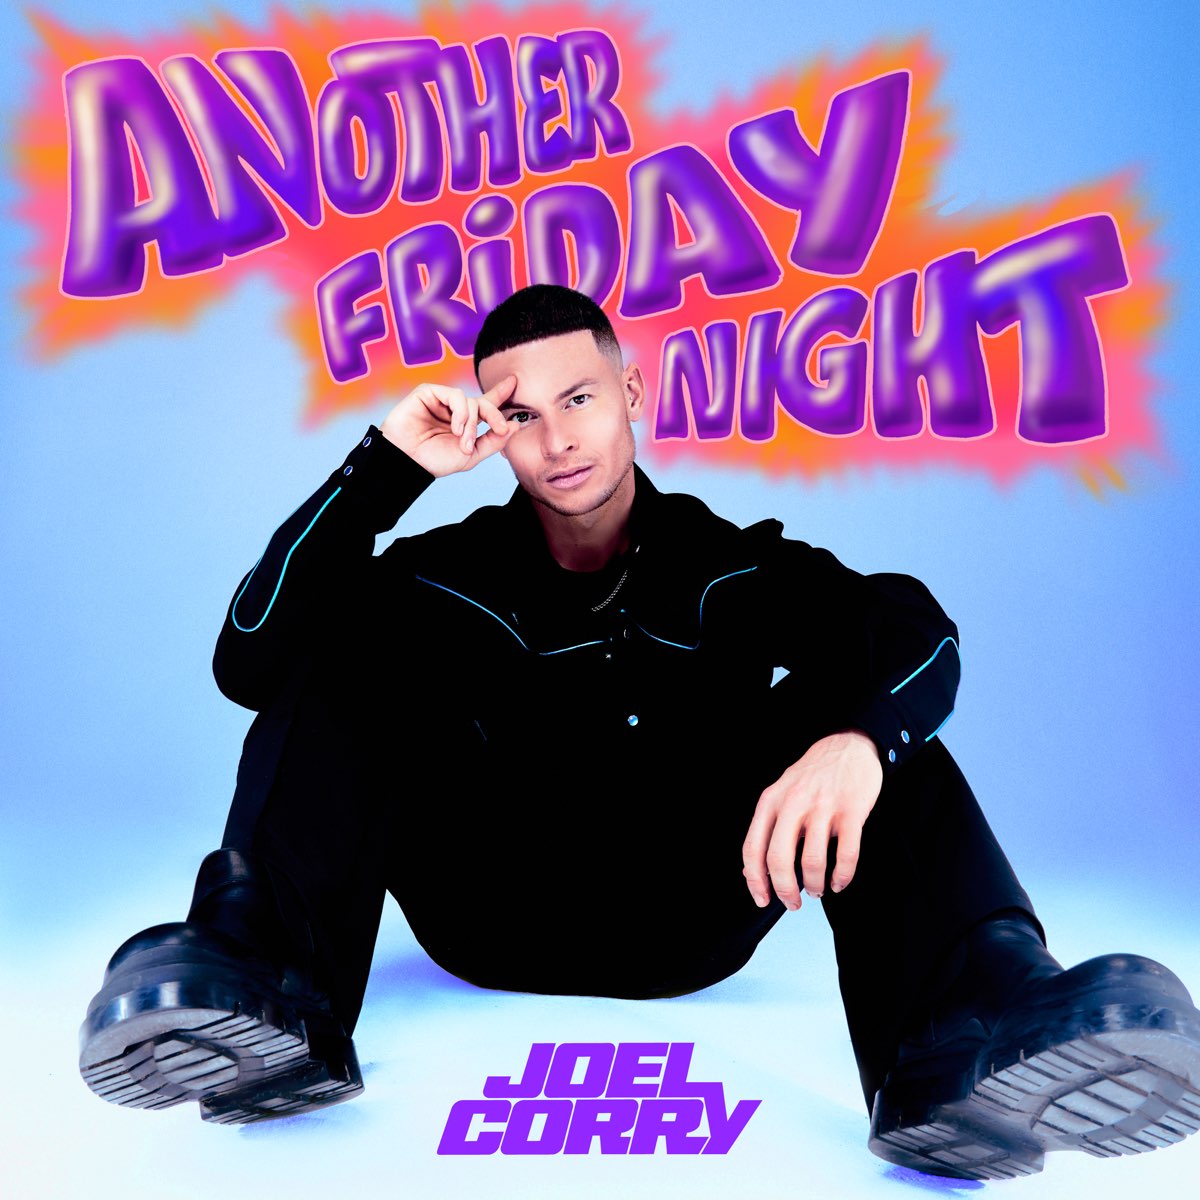 Joel Corry Another Friday Night cover artwork